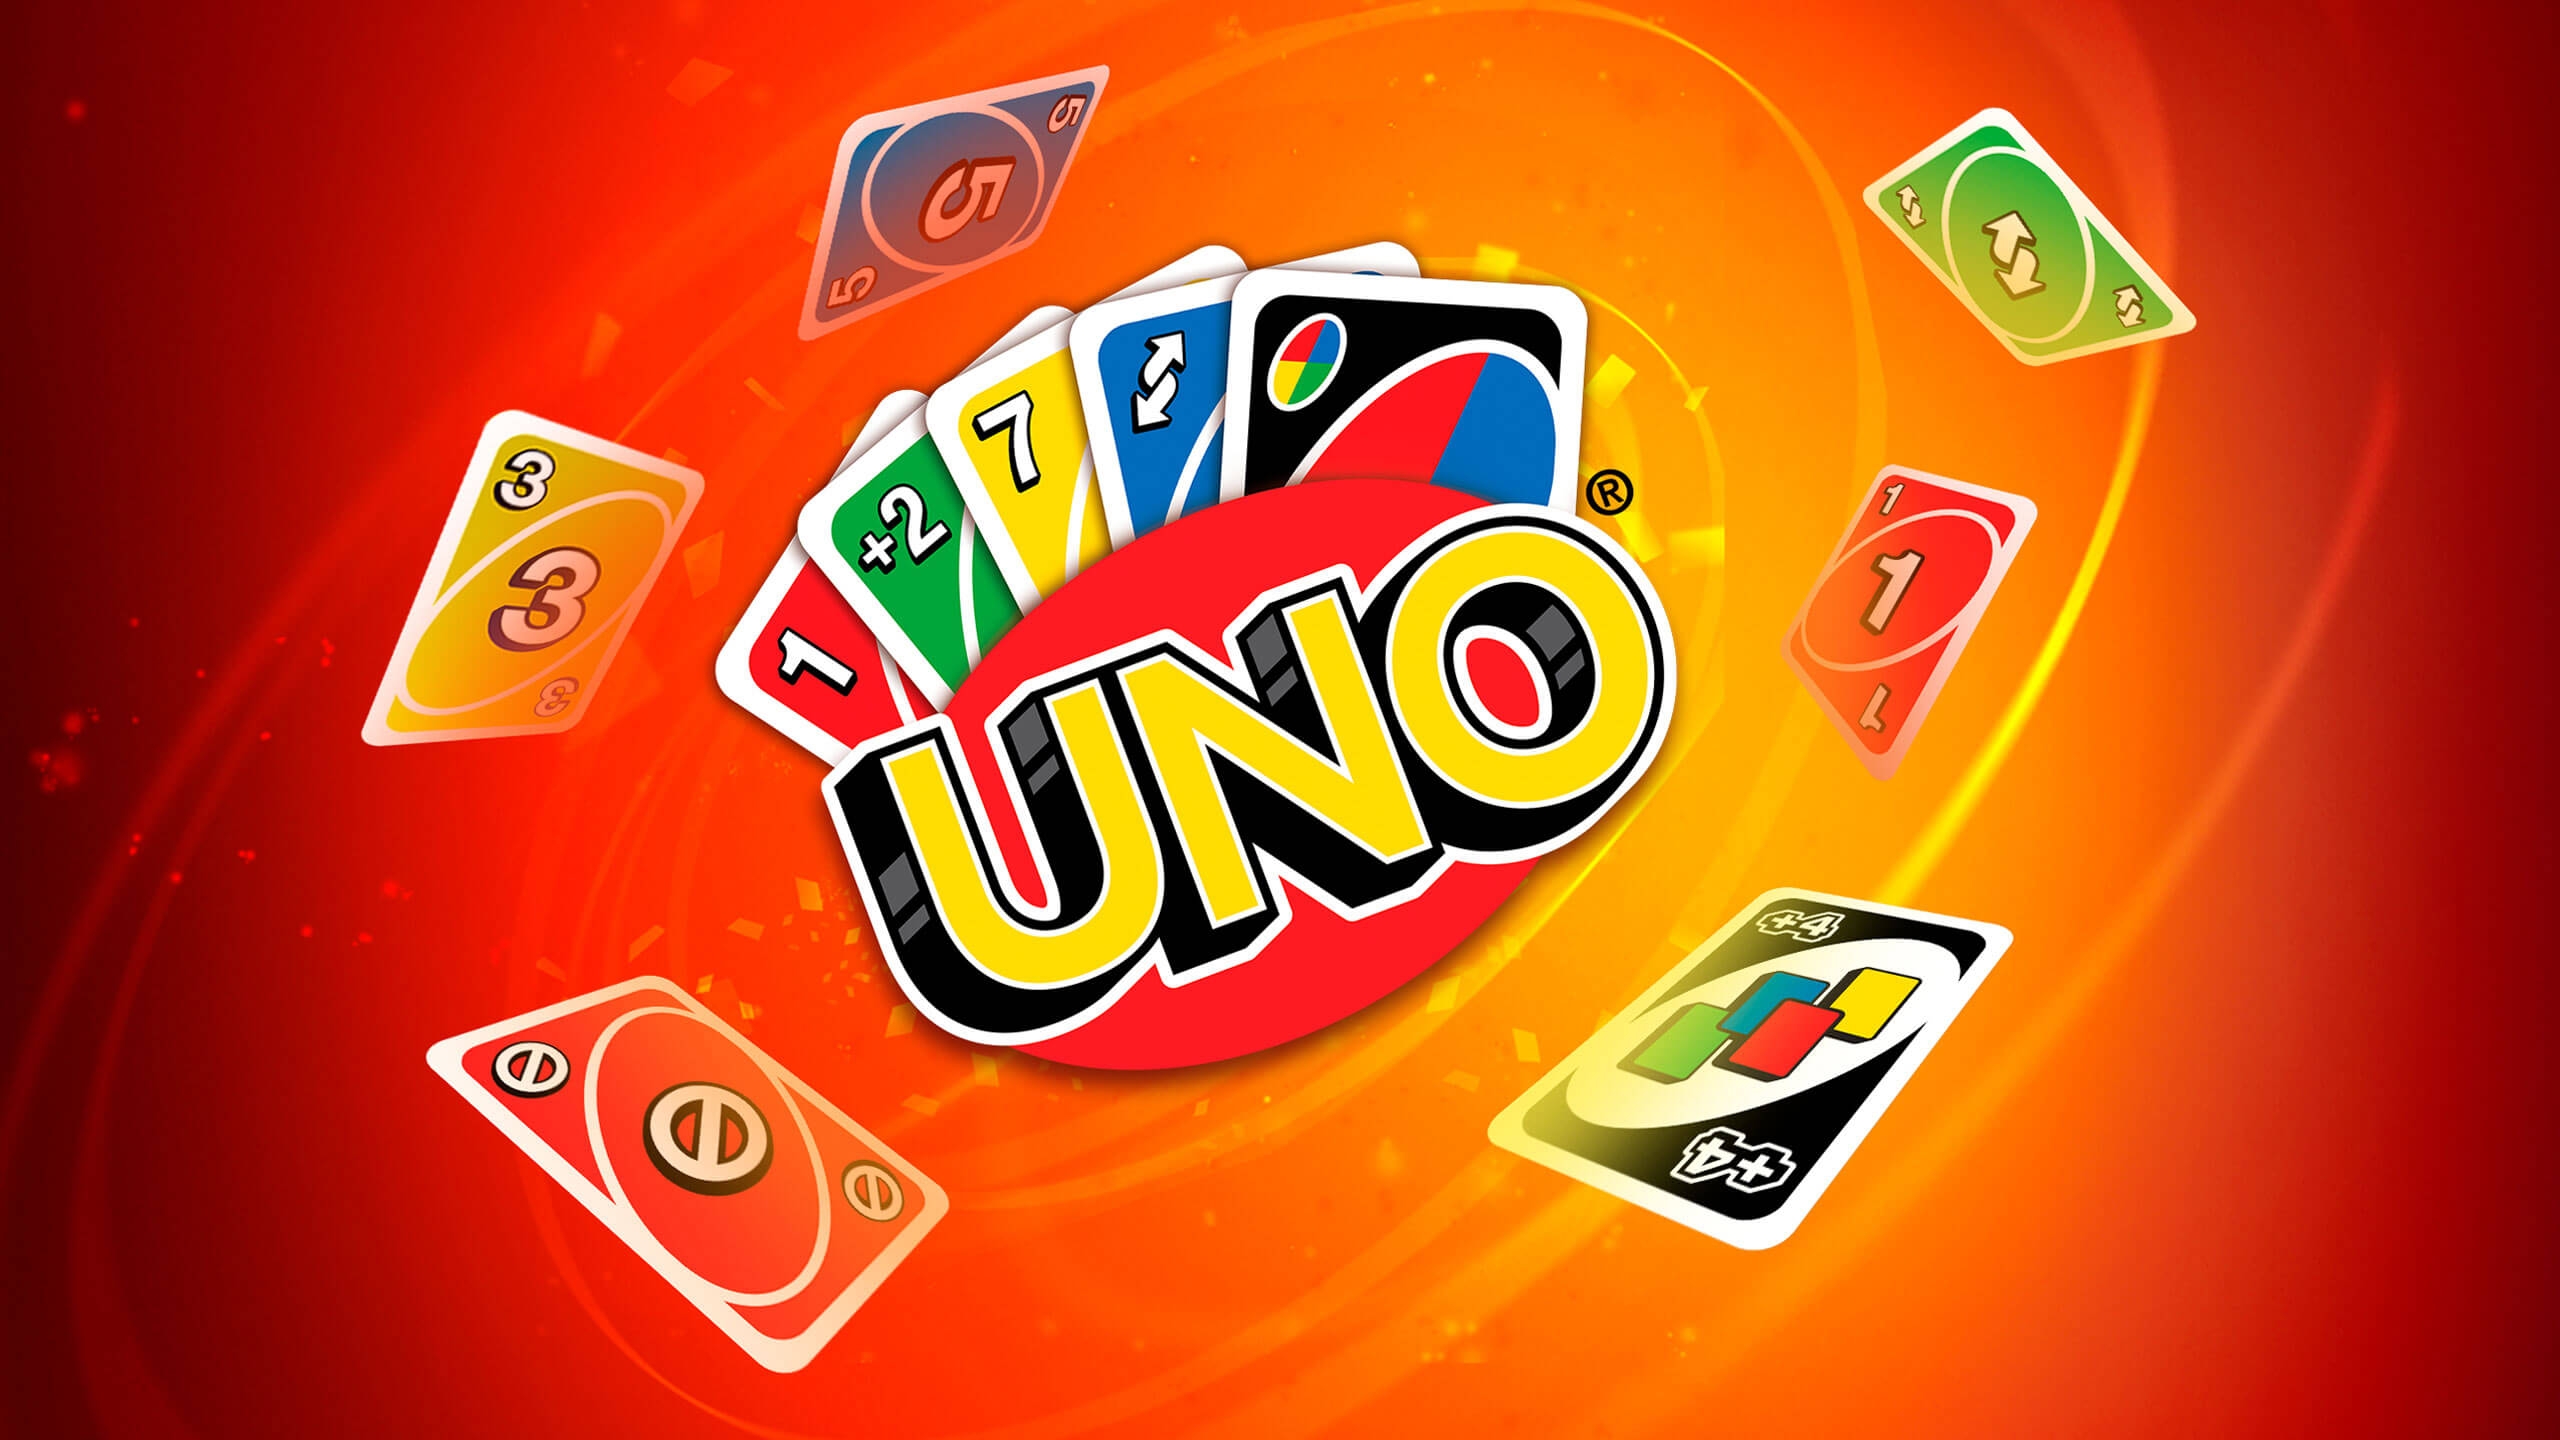 UNO, PC Ubisoft Connect Game